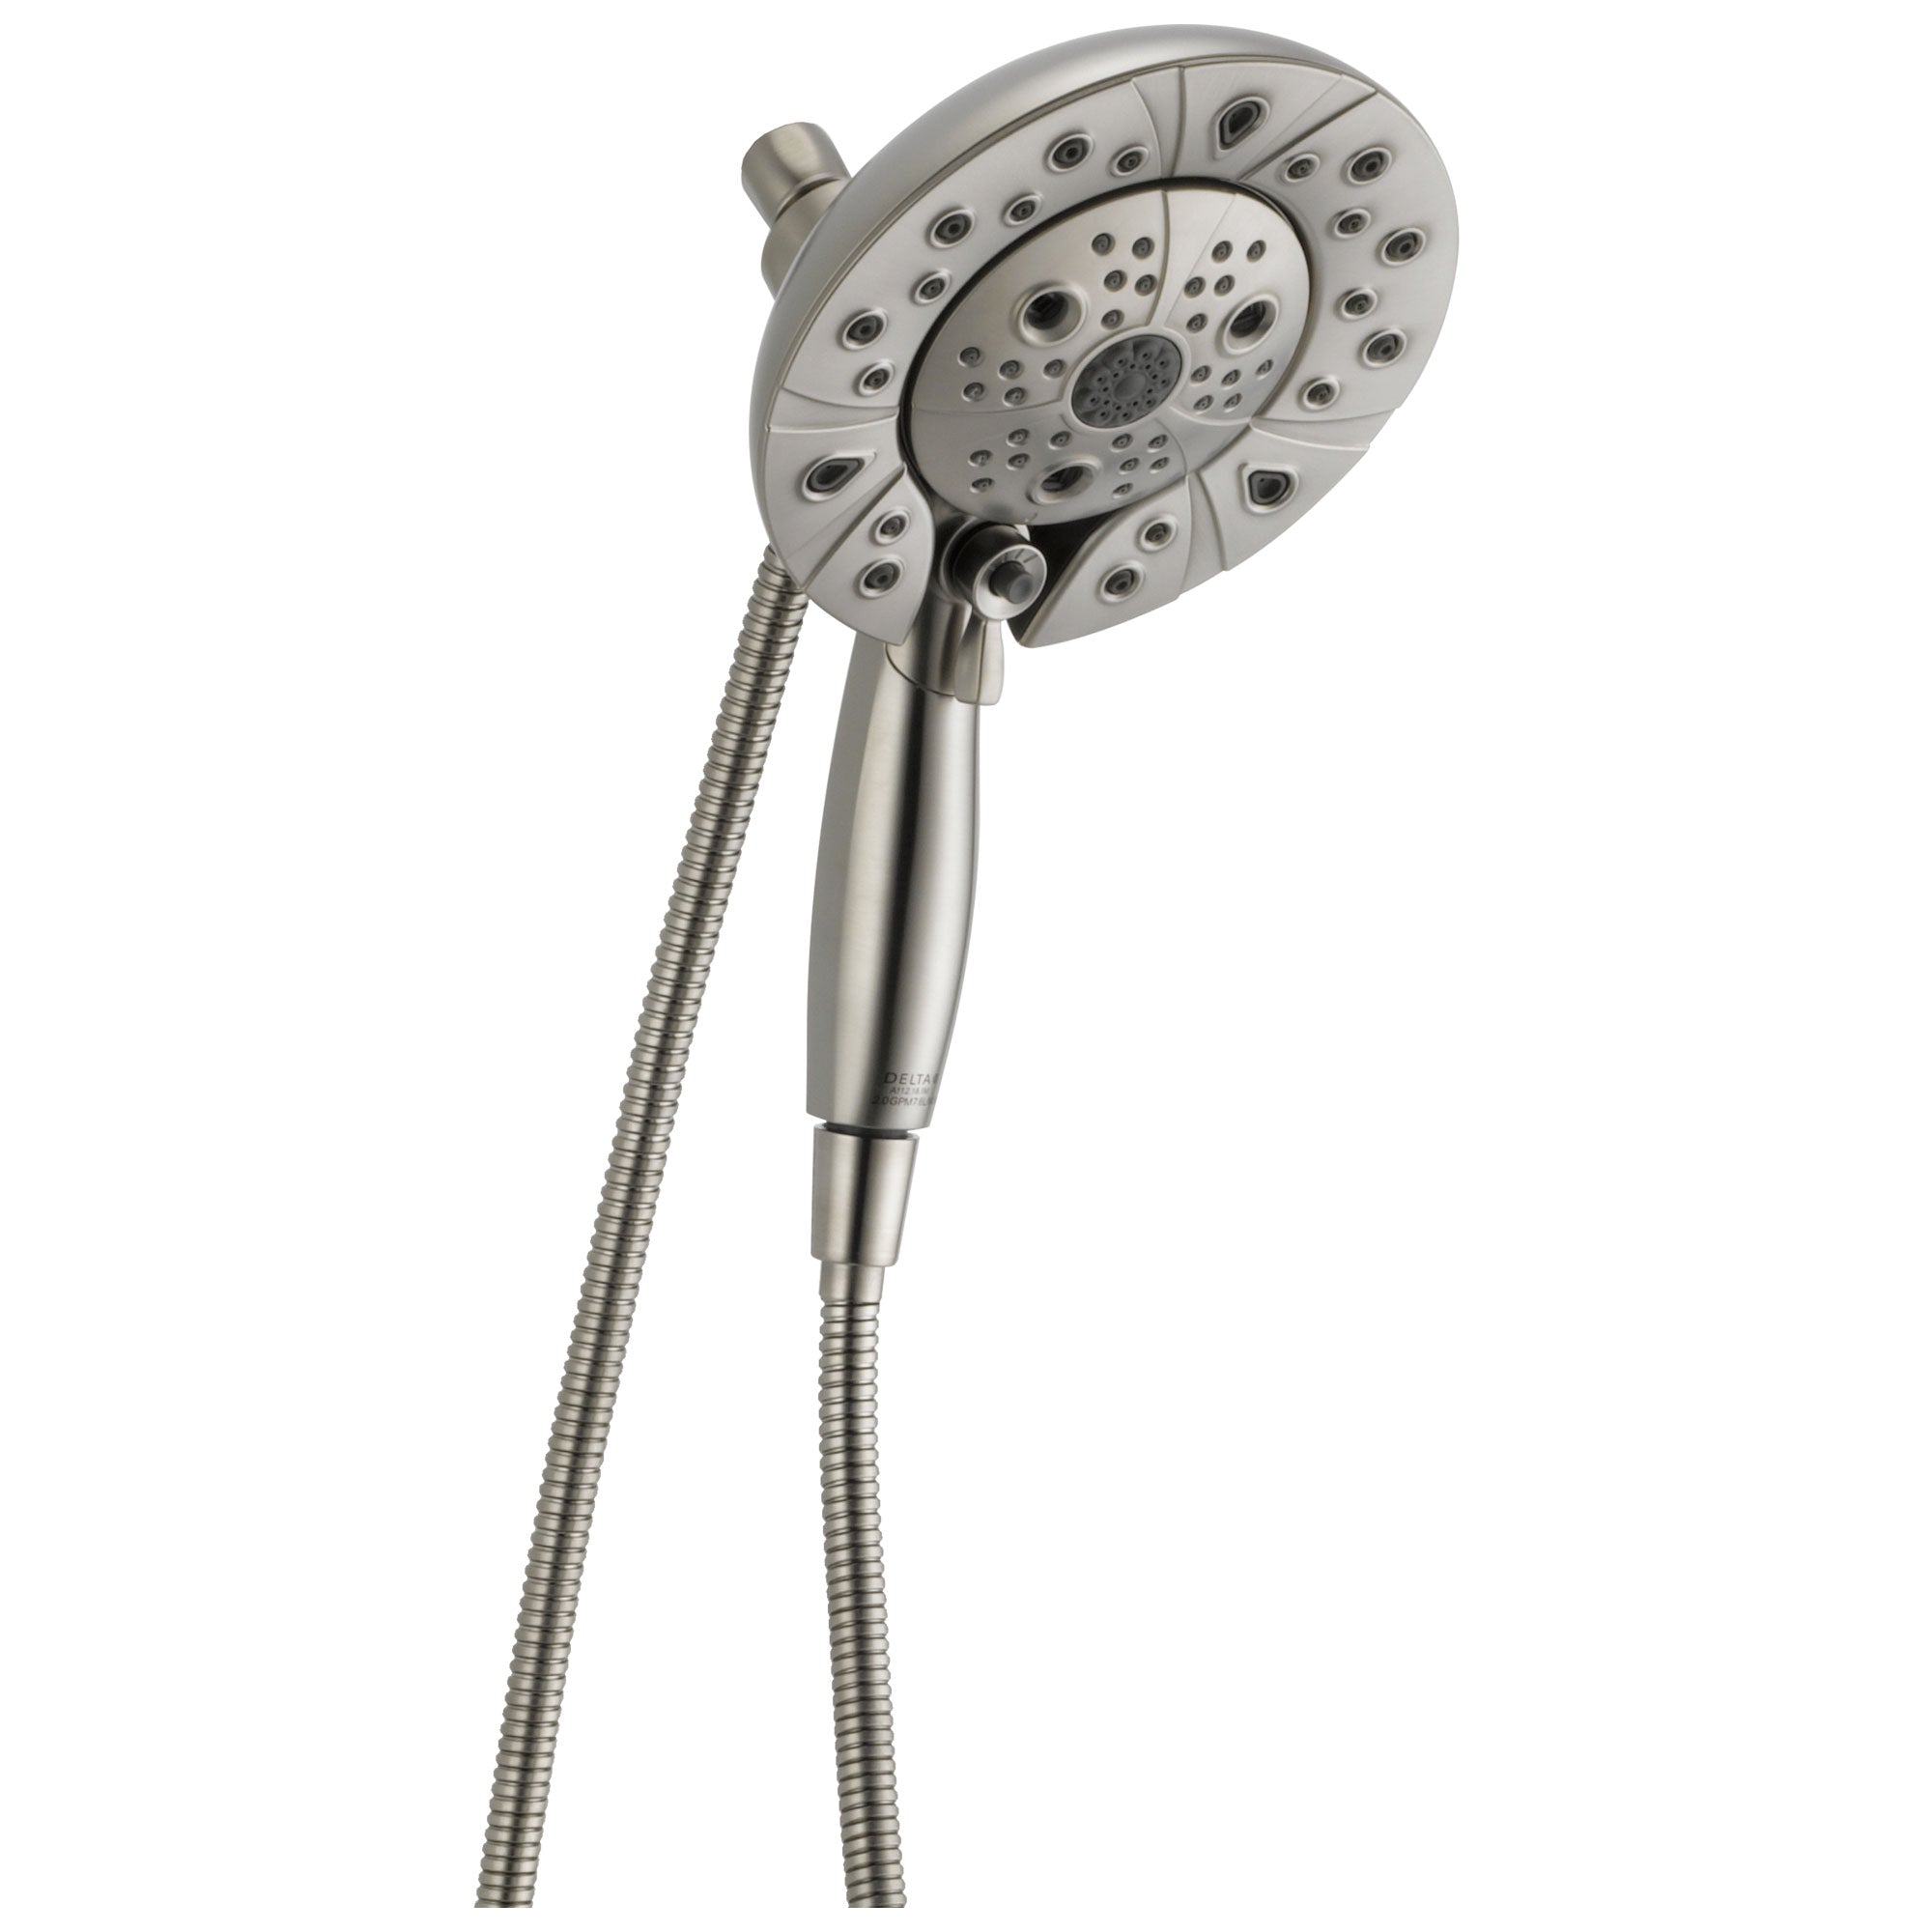 Delta Universal Showering Components Stainless Steel Finish 5-Setting Shower Arm Mount Two-in-One Hand Shower and Showerhead Combination D58480SSPK